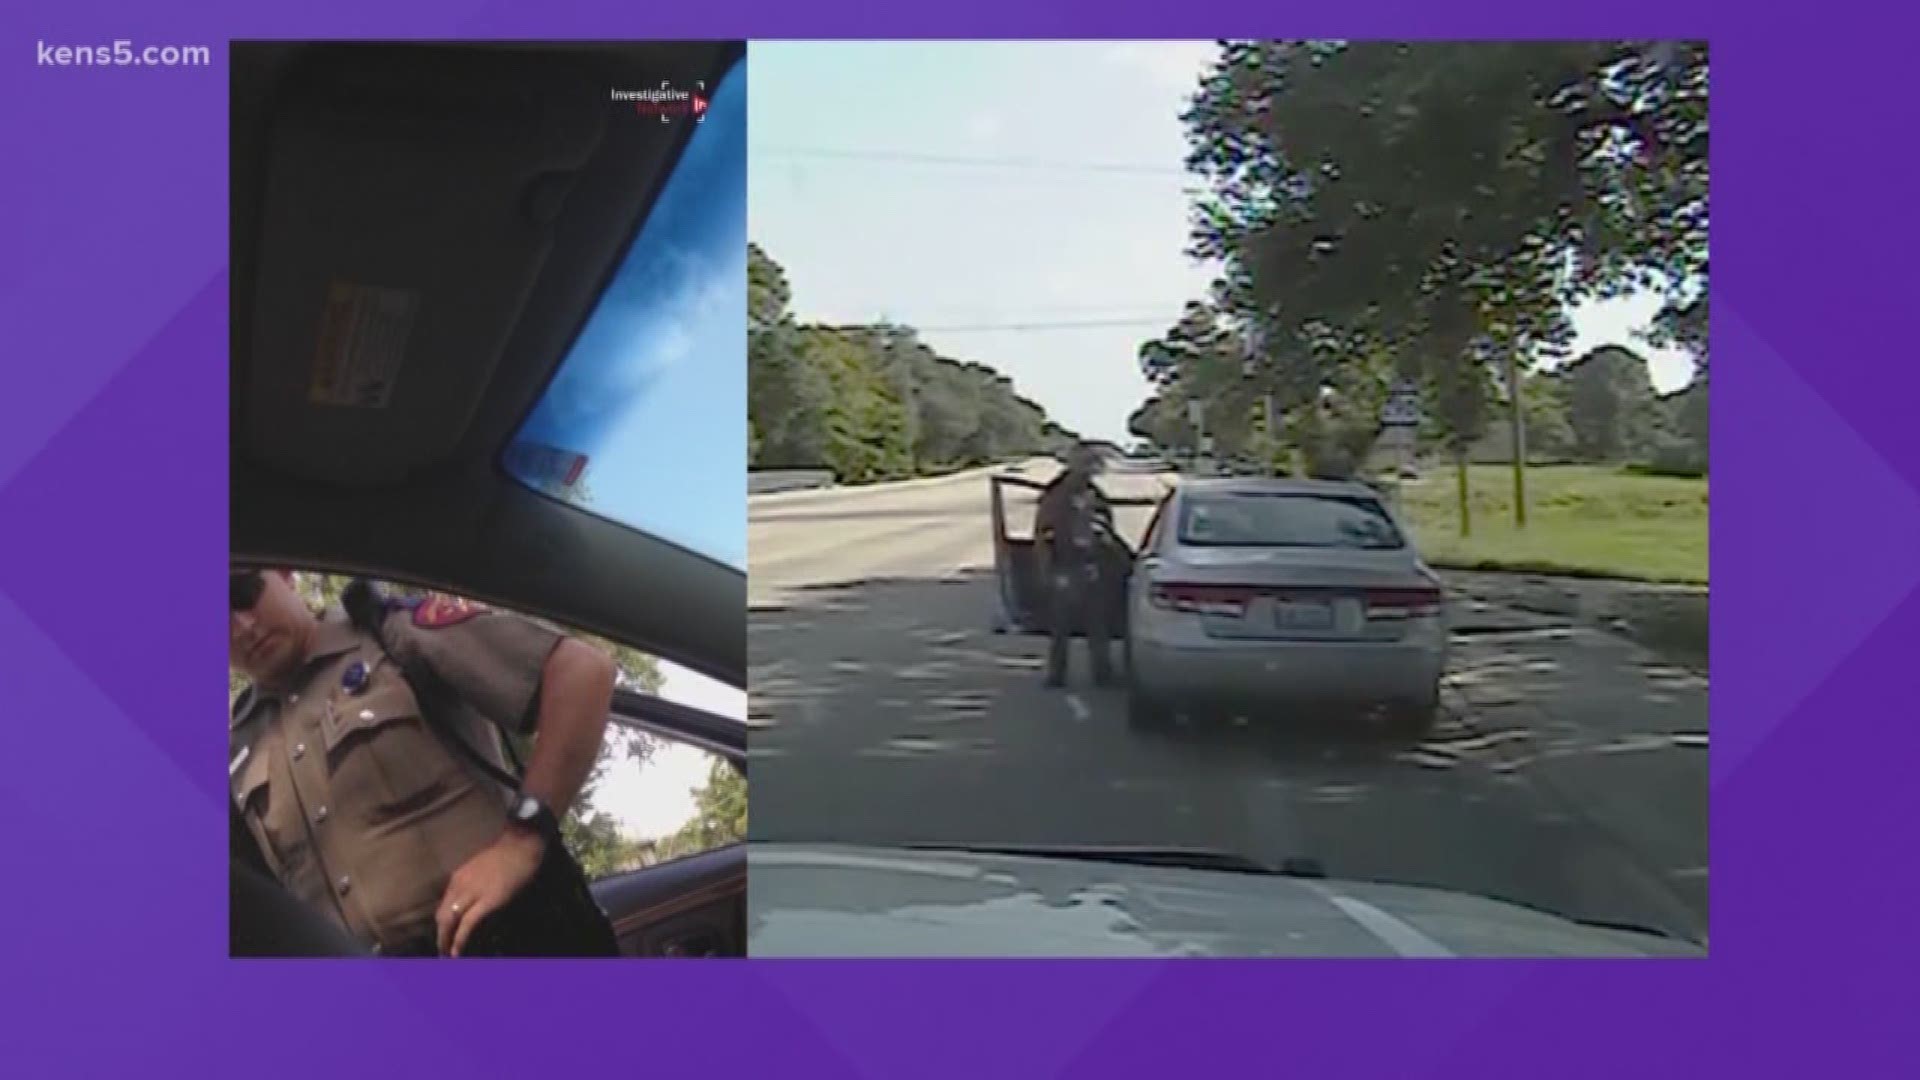 A state House committee will hold a hearing on Friday morning after new video of the traffic stop of Sandra Bland was made public. The state Attorney General and the Texas Department of Public Safety have been invited to testify about the video.